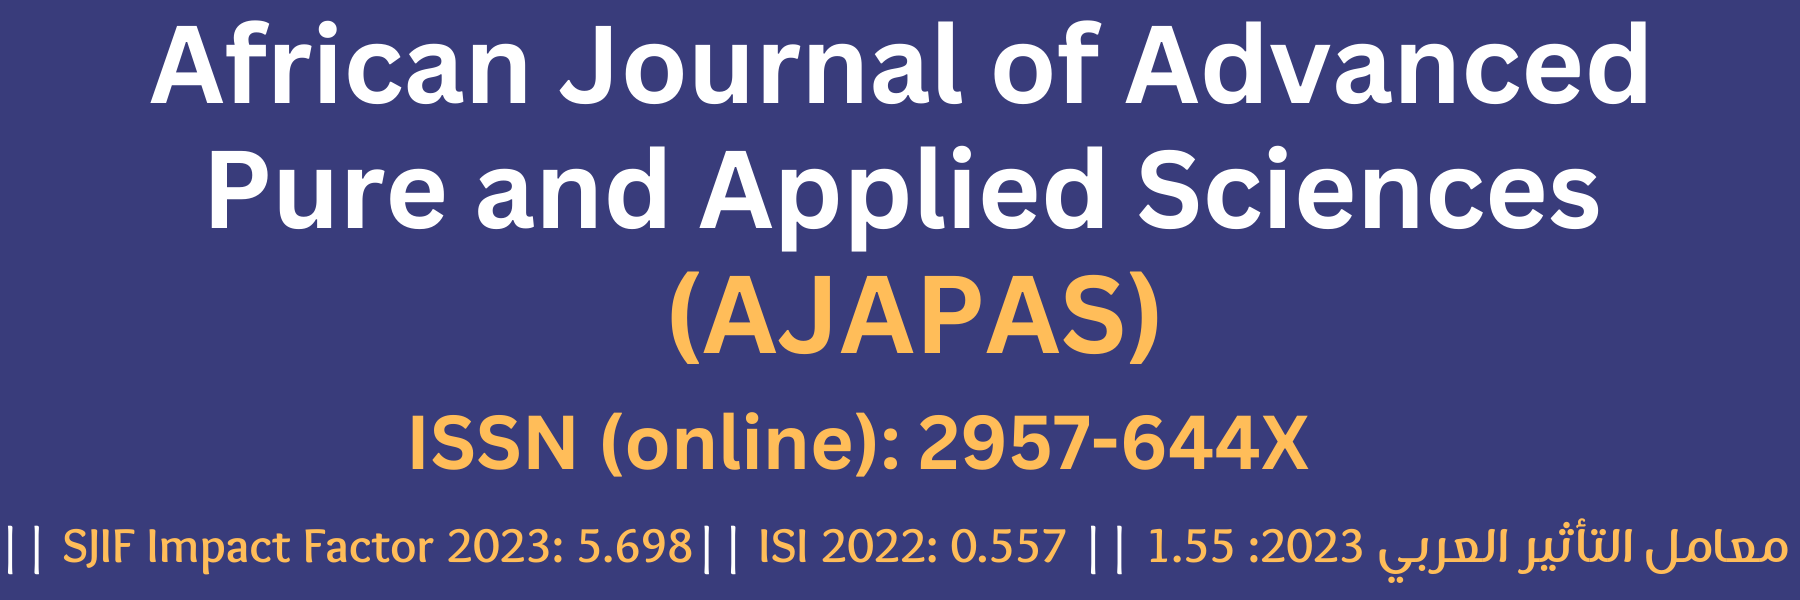 African Journal of Advanced Pure and Applied Sciences (AJAPAS)